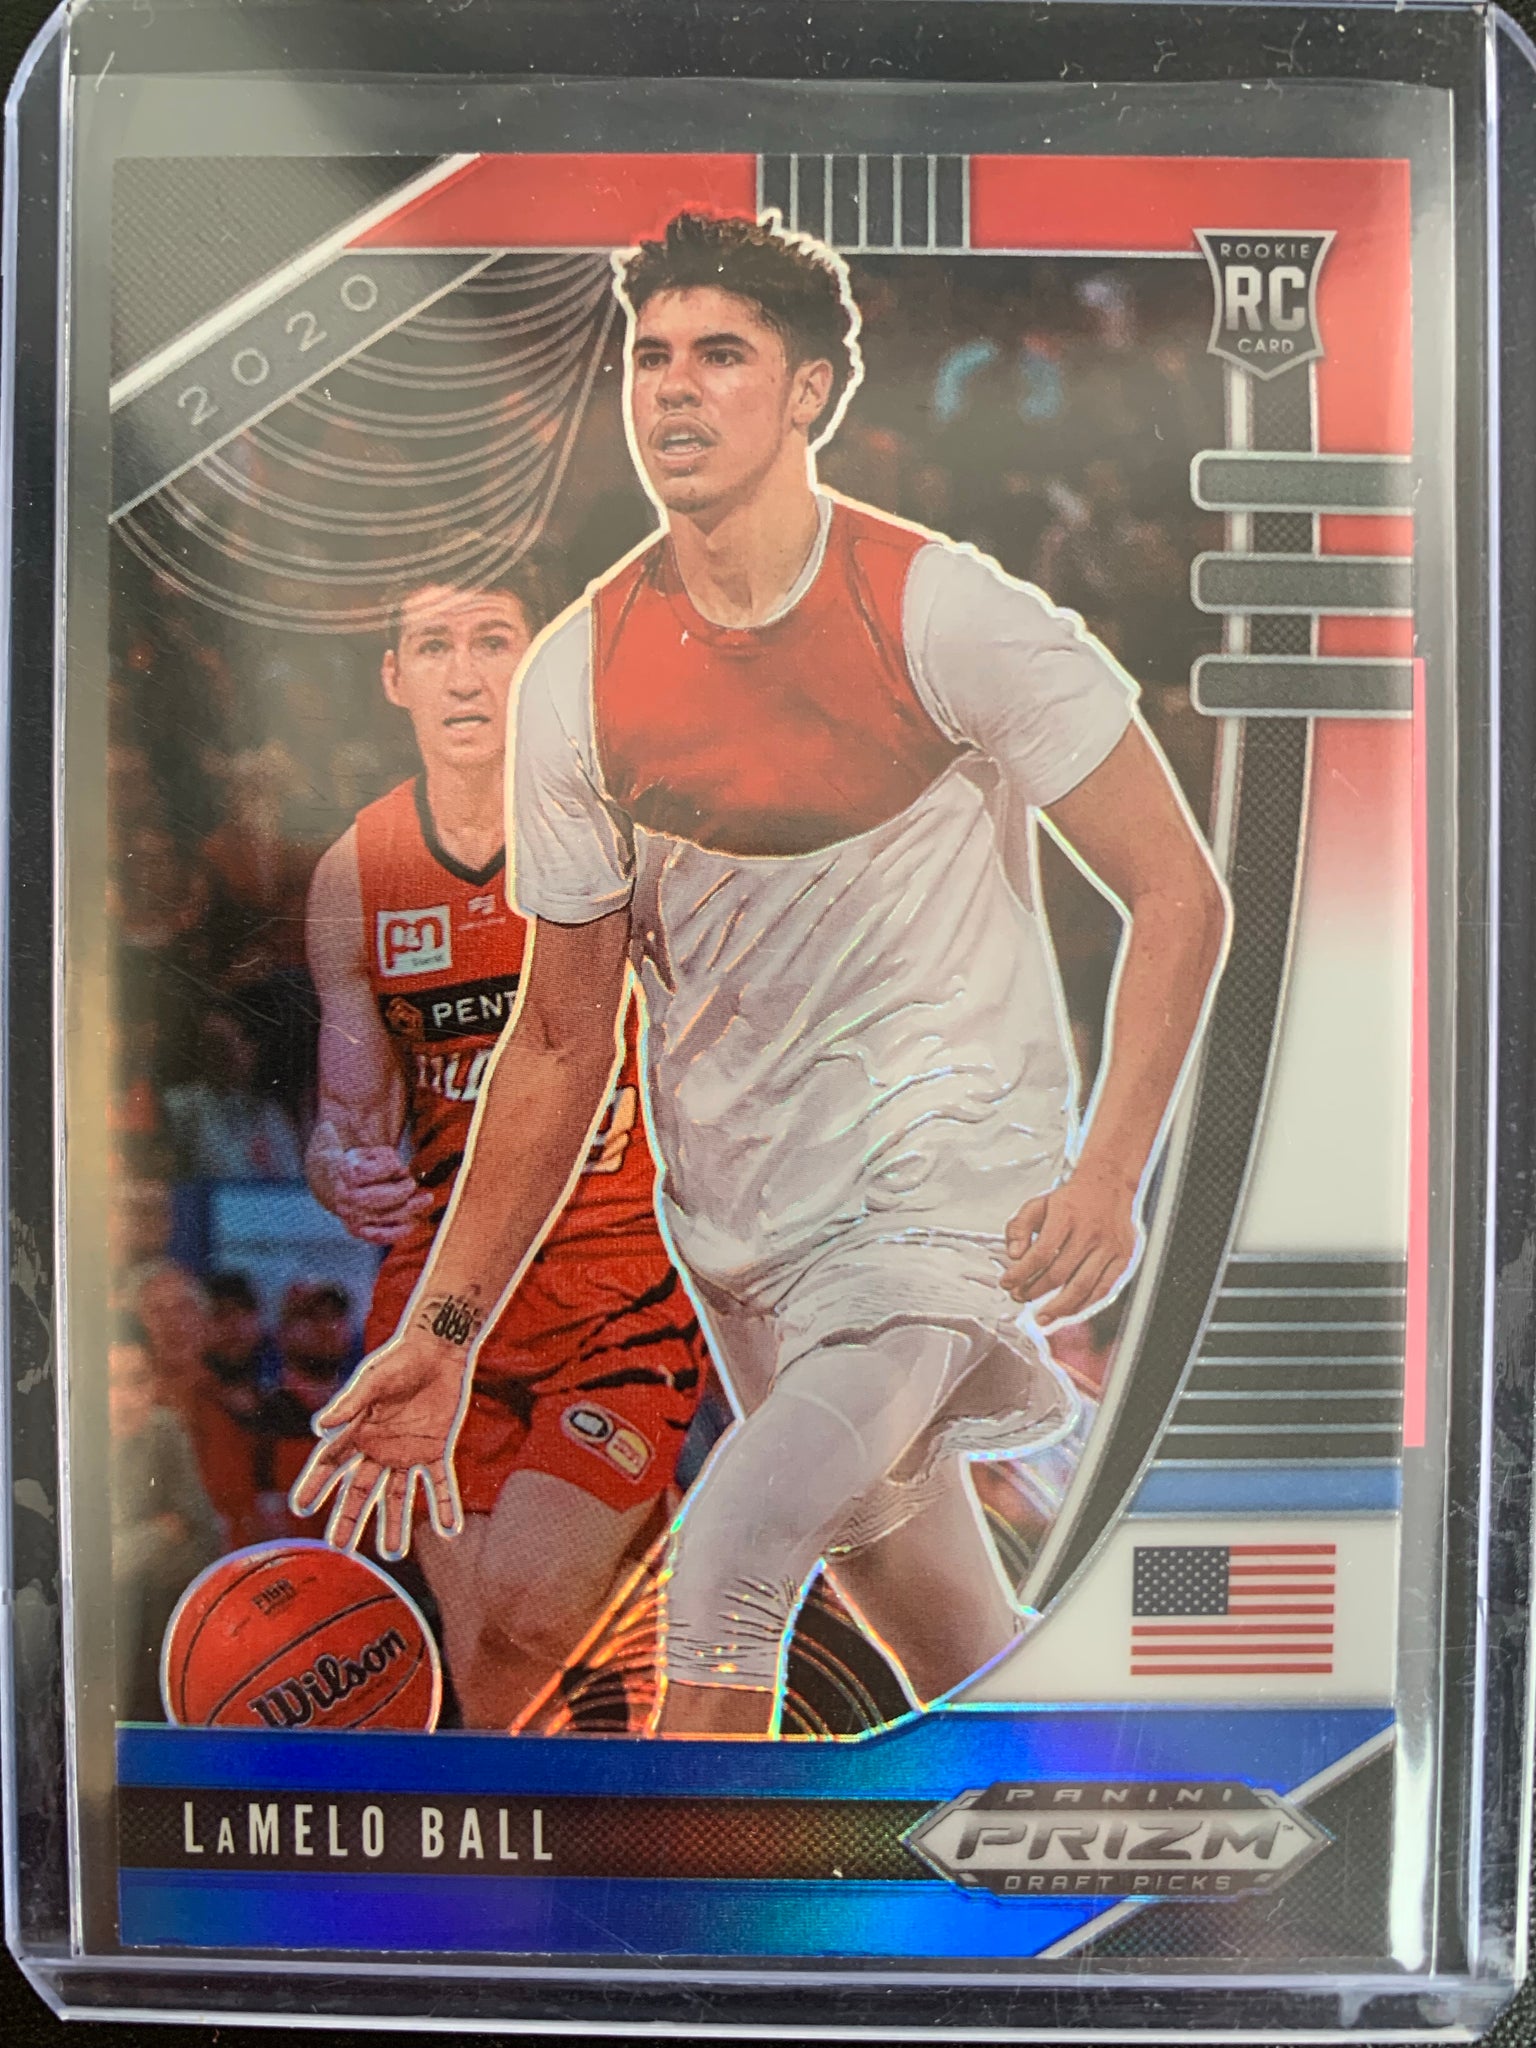 2020 PANINI PRIZM DRAFT PICKS BASKETBALL #43 CHARLOTTE HORNETS - LAMELO BALL RED WHITE AND BLUE PRIZM ROOKIE CARD